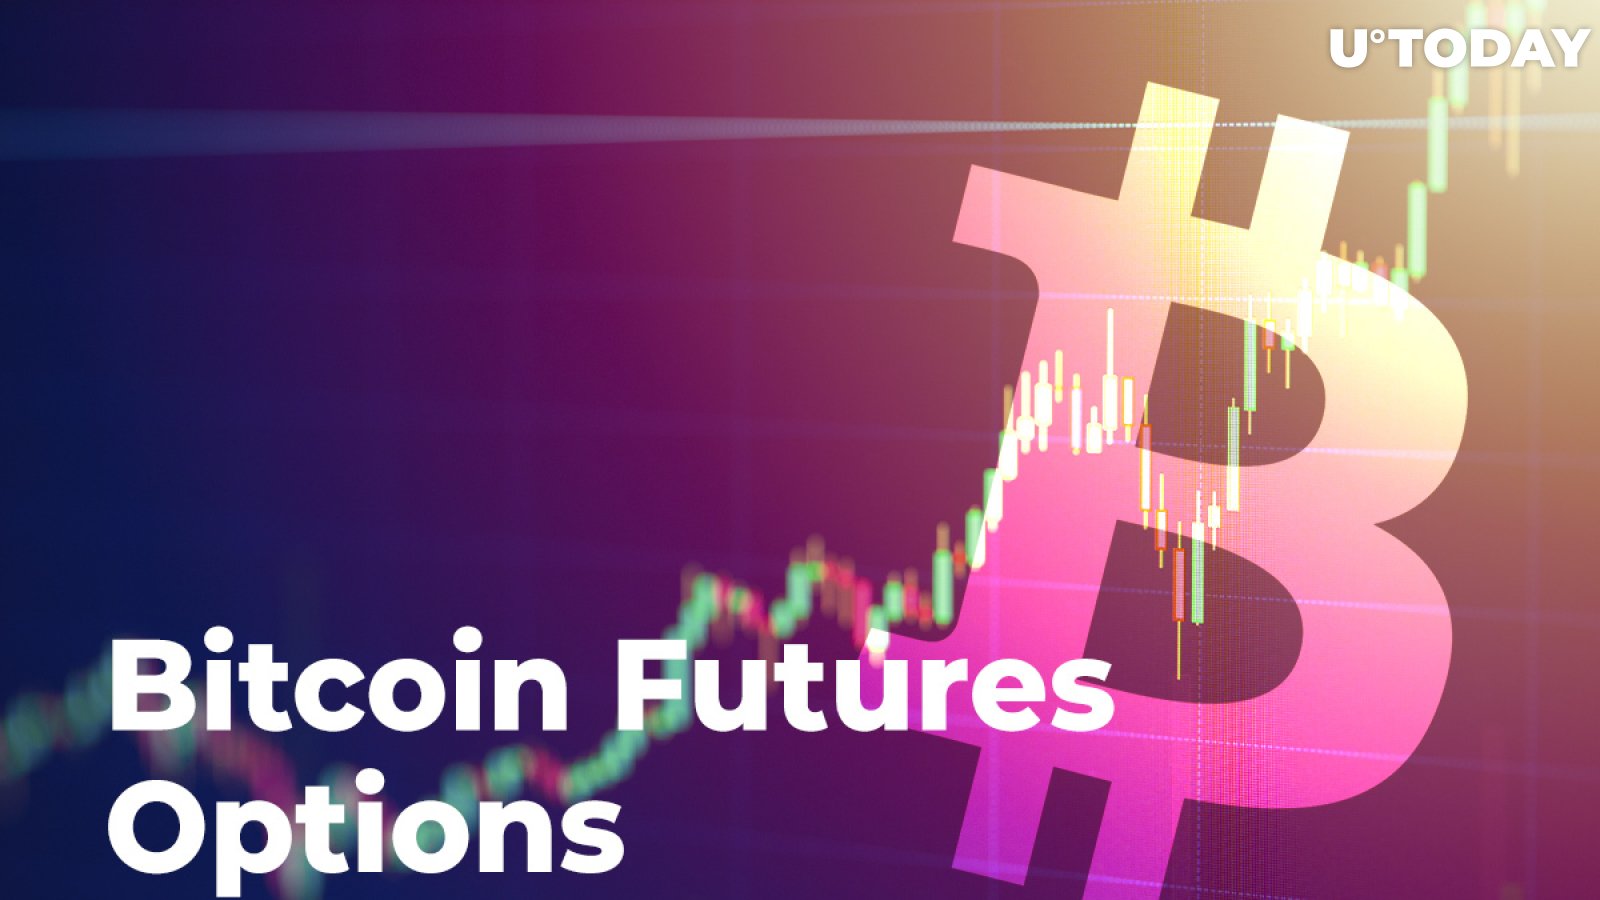 cme bitcoin options on futures)